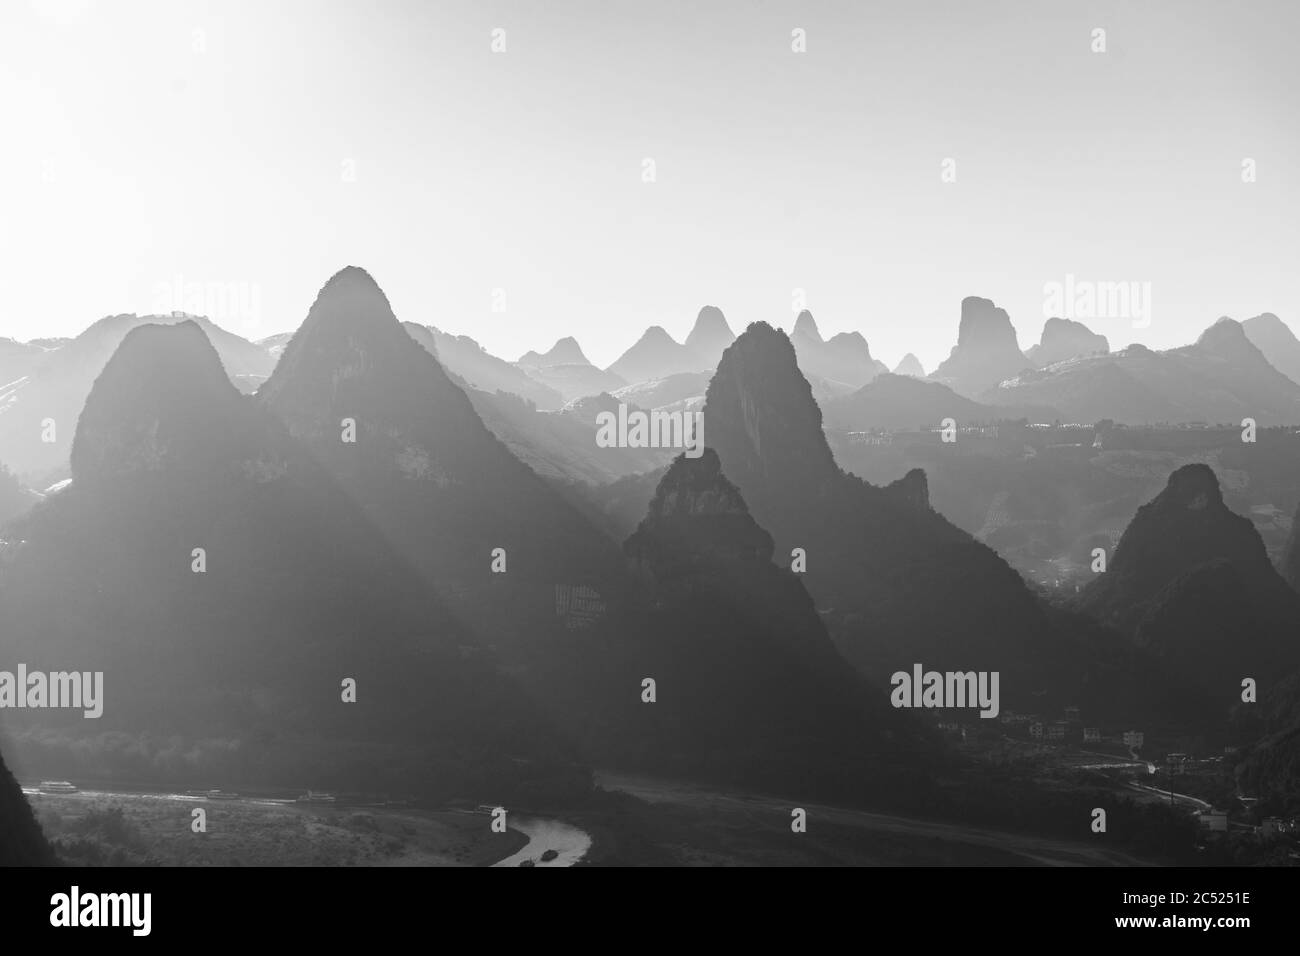 Sunlight over the beautiful karst landscape of Xingping, Guilin, China Stock Photo